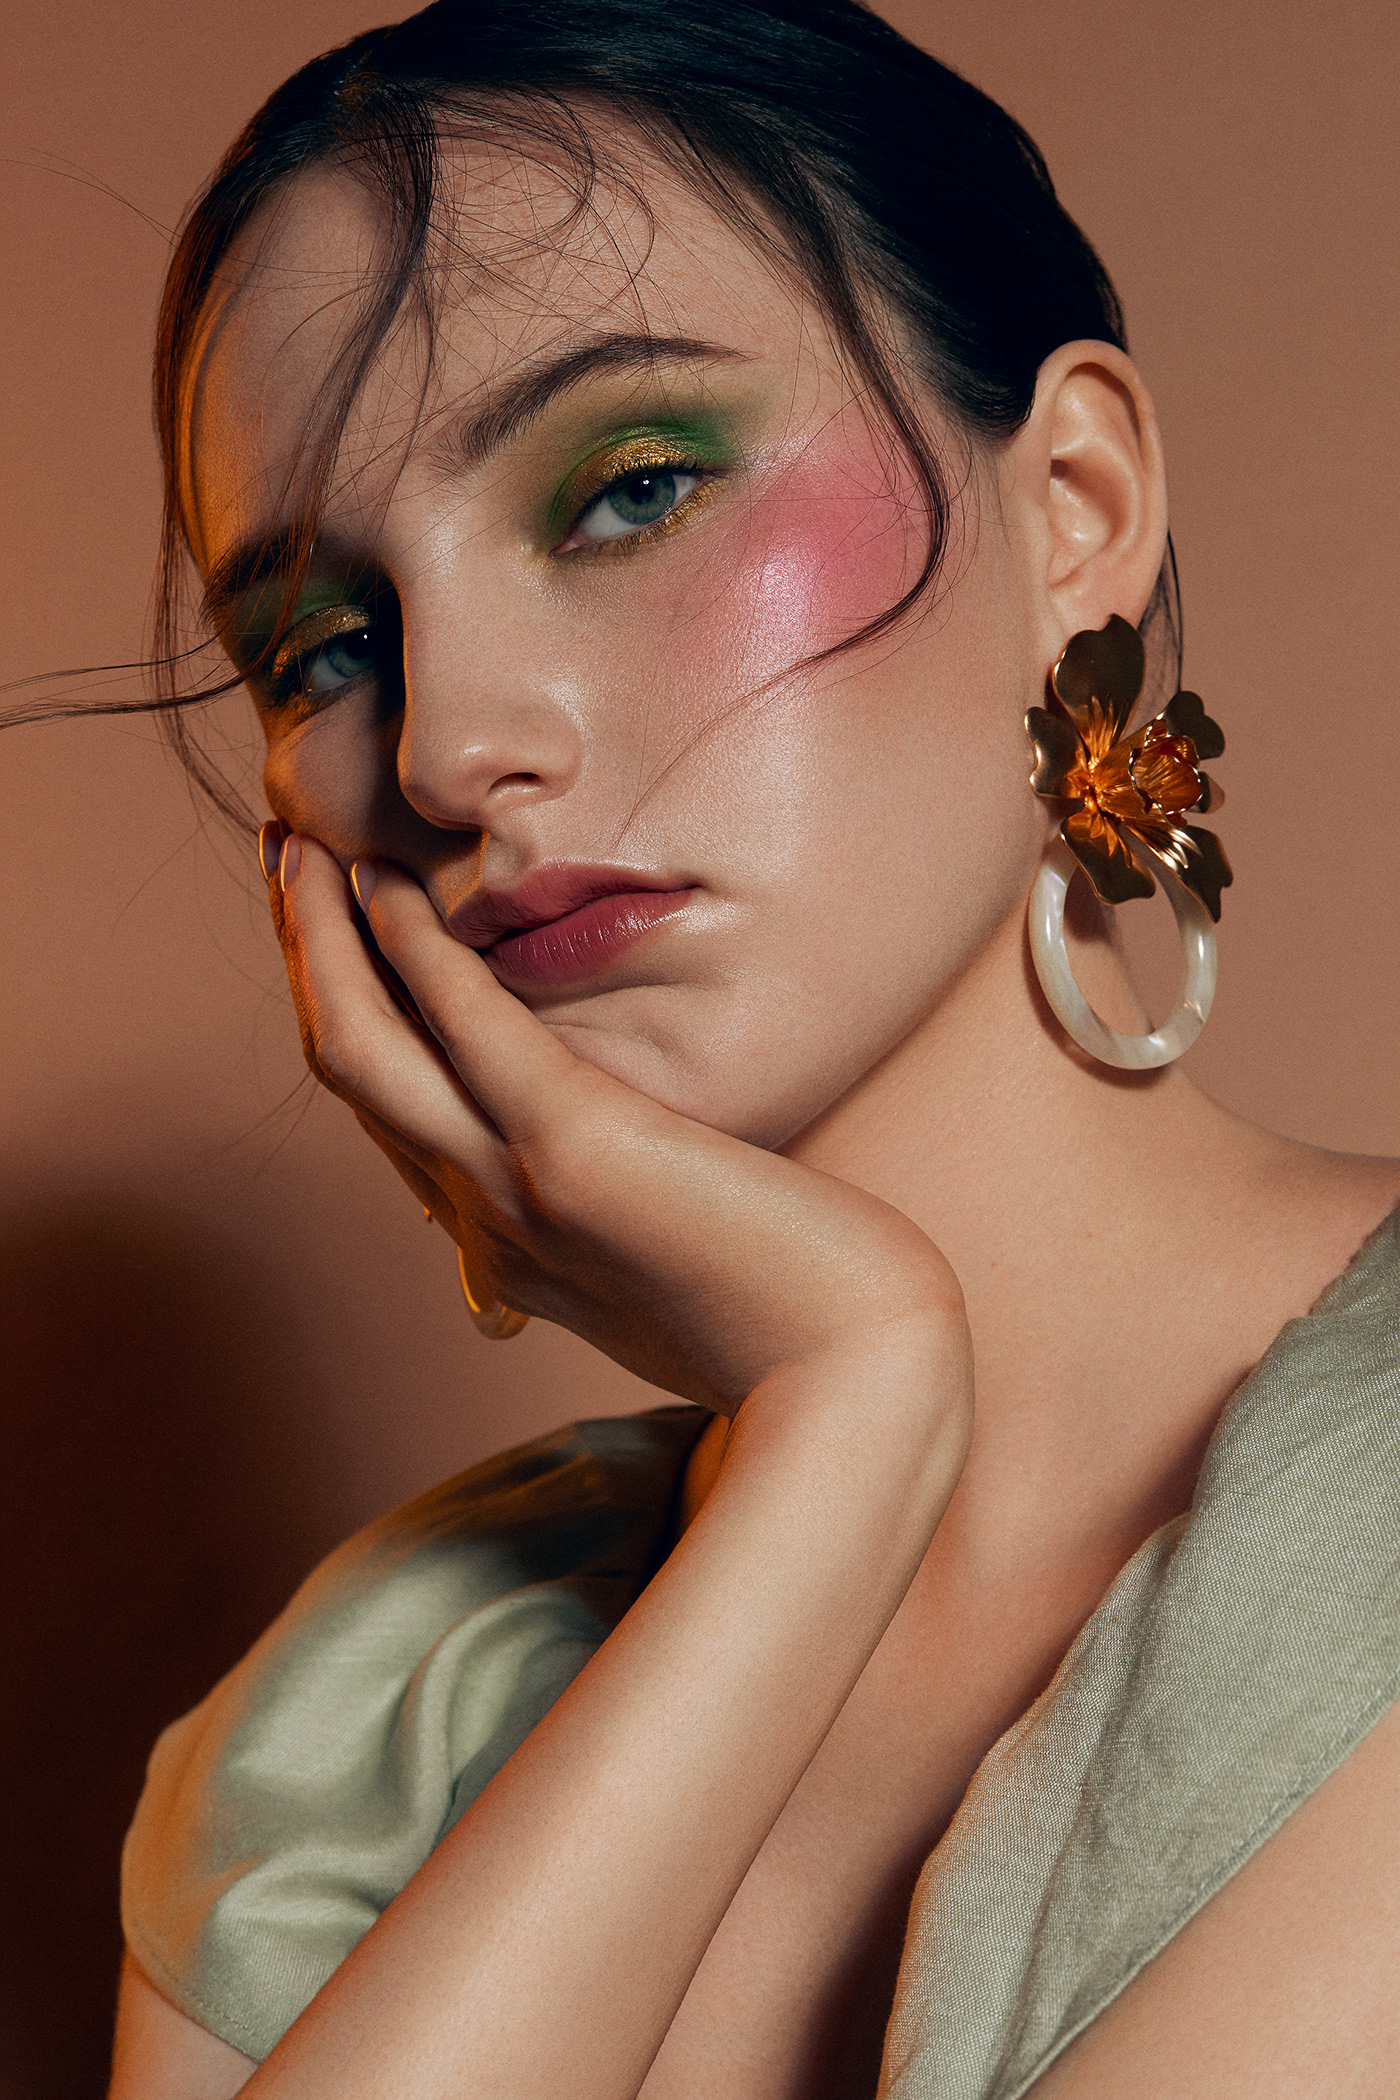 Editorial beauty photography publication, natural skin retouching and creative makeup, gold earrings